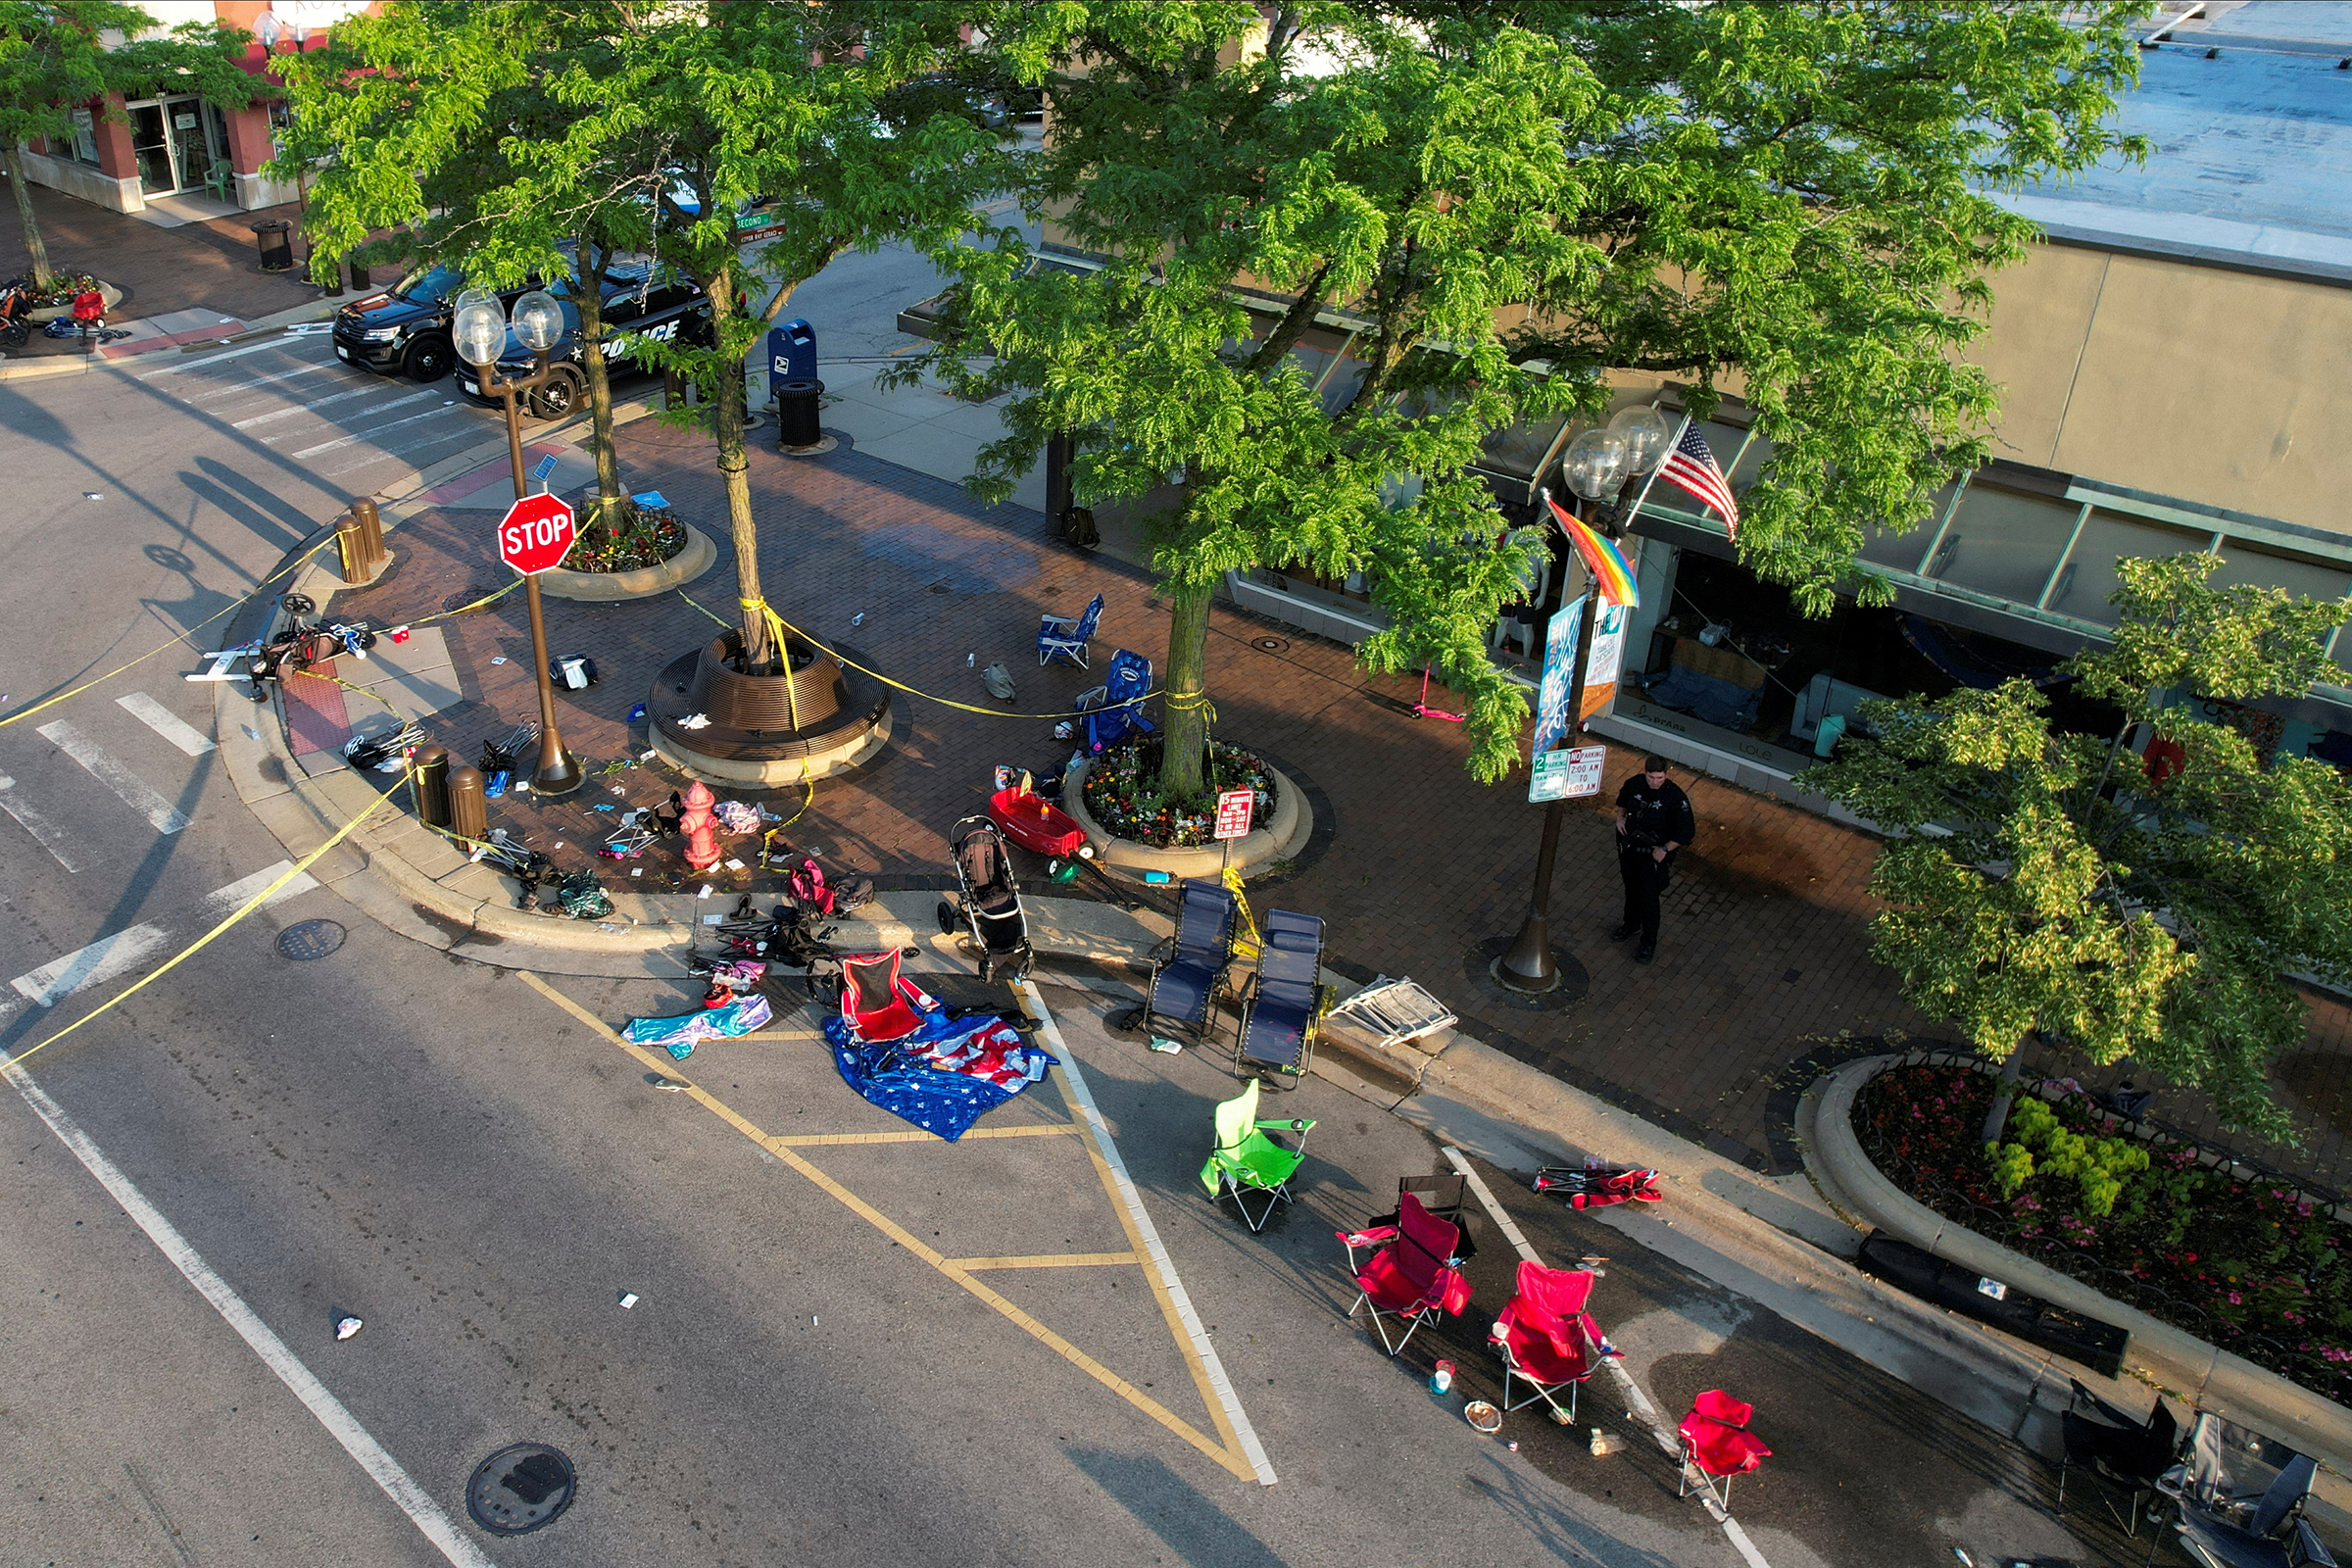 People’s belongings lie abandoned along the parade route after a mass shooting at a Fourth of July parade in the wealthy Chicago suburb of Highland Park, Illinois, U.S. July 5, 2022.